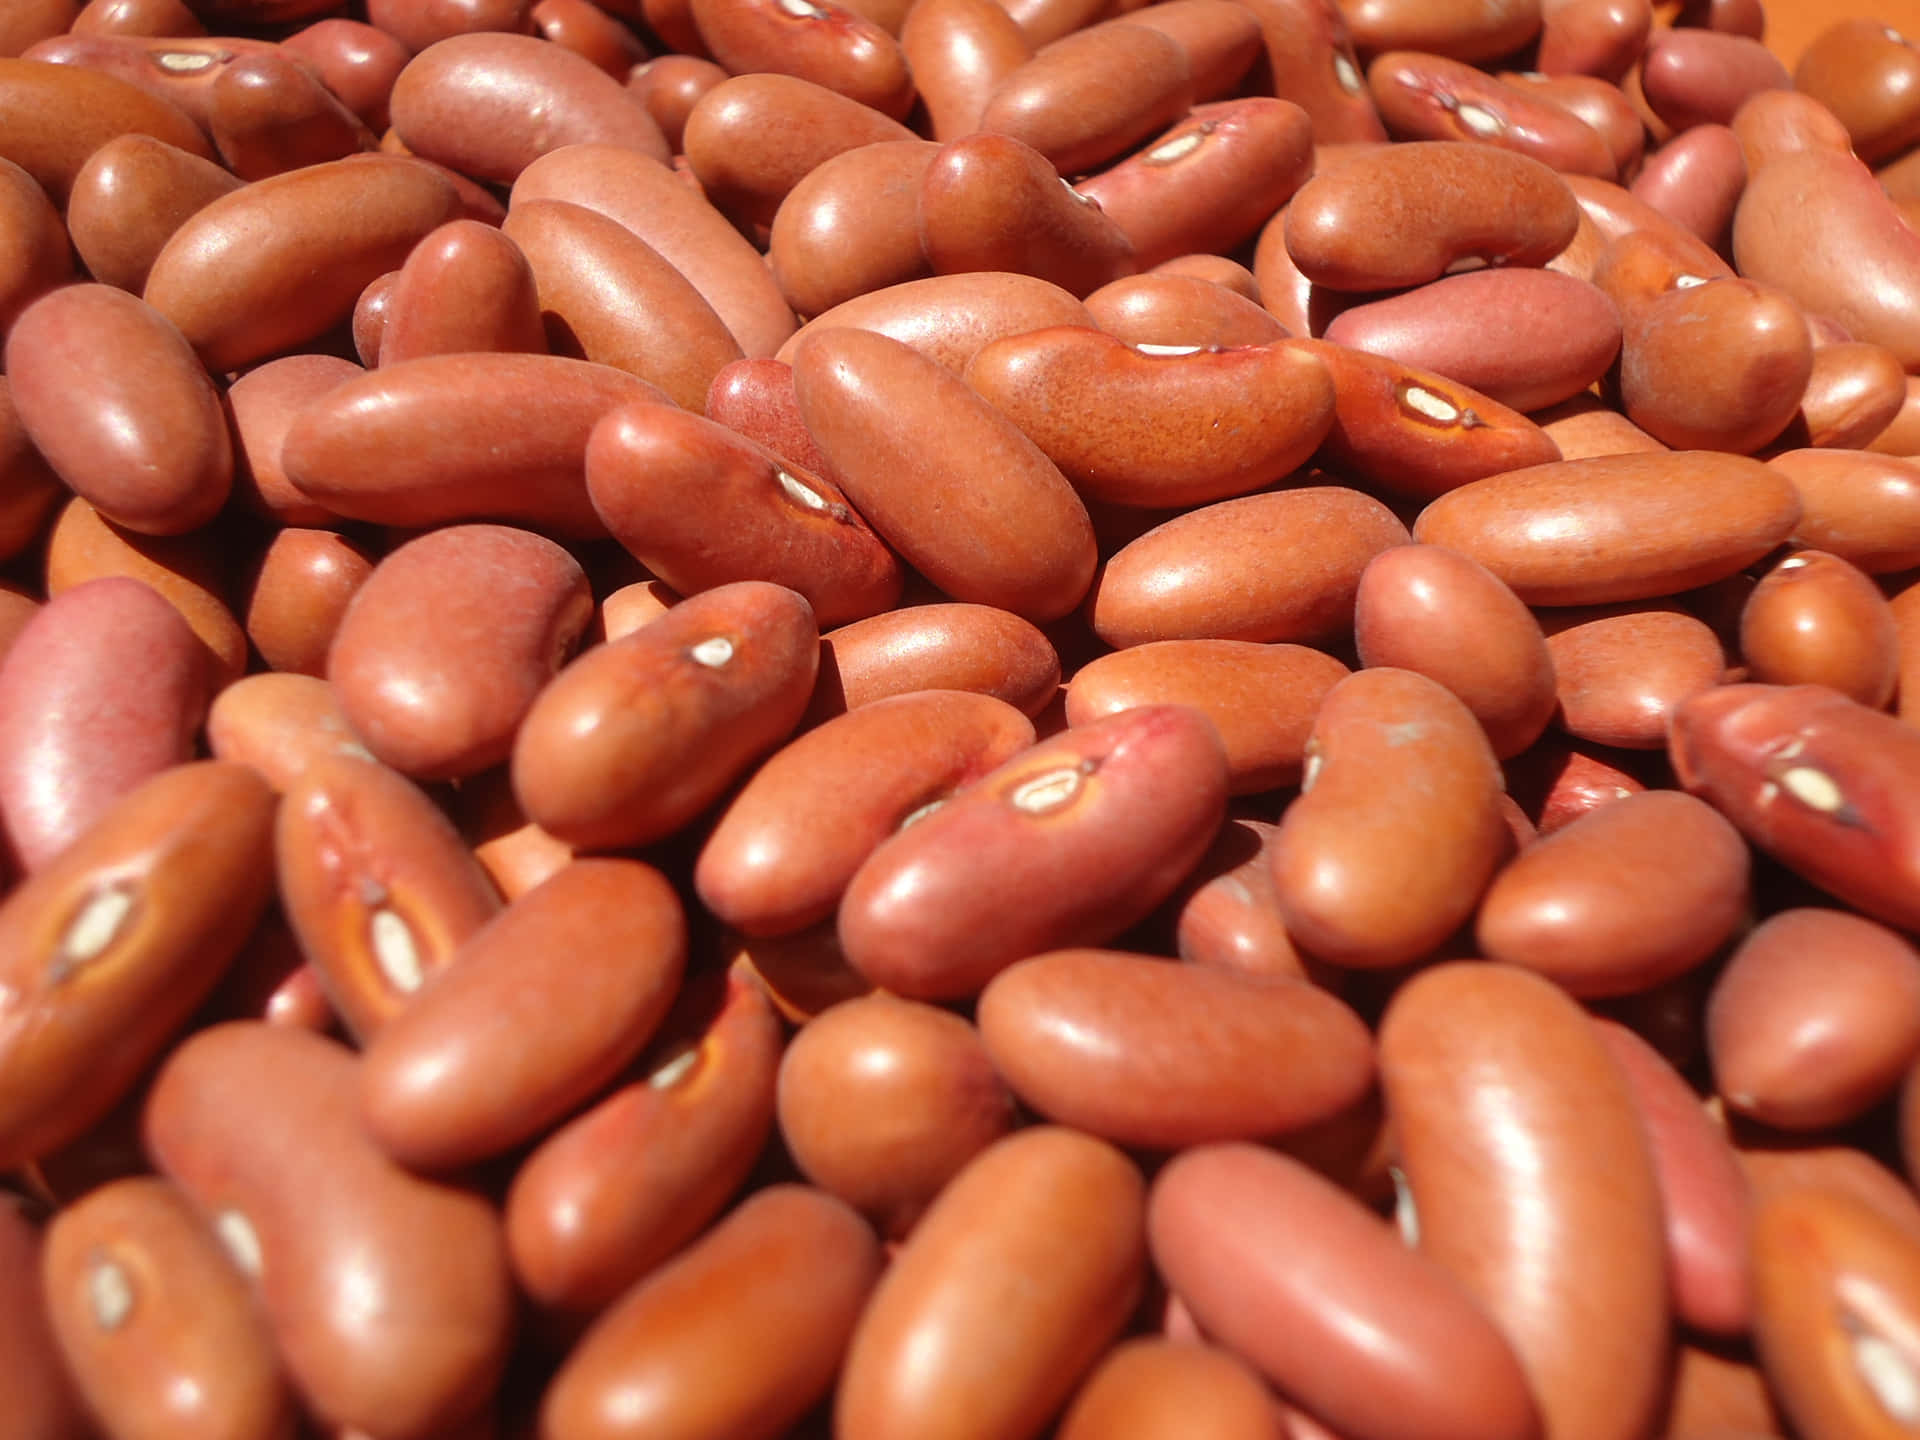 "Panoramic View of Freshly Harvested Beans"